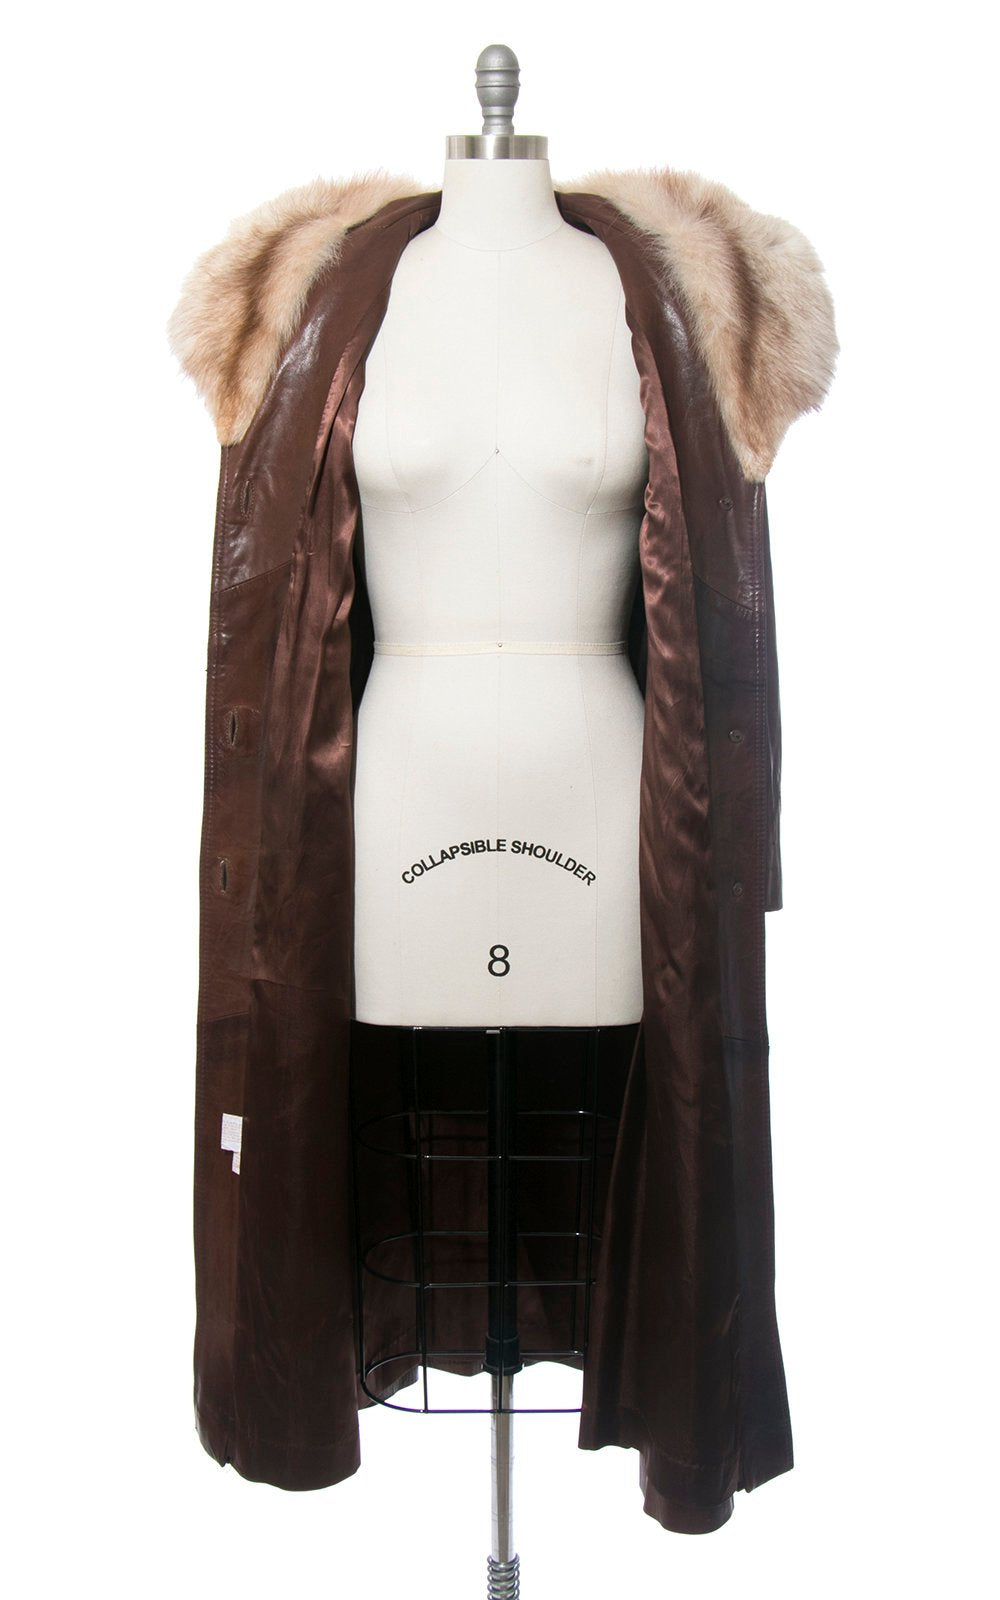 Vintage 1970s Coat | 70s Fox Fur Collar Buttery Brown Leather Belted Princess Coat (medium)